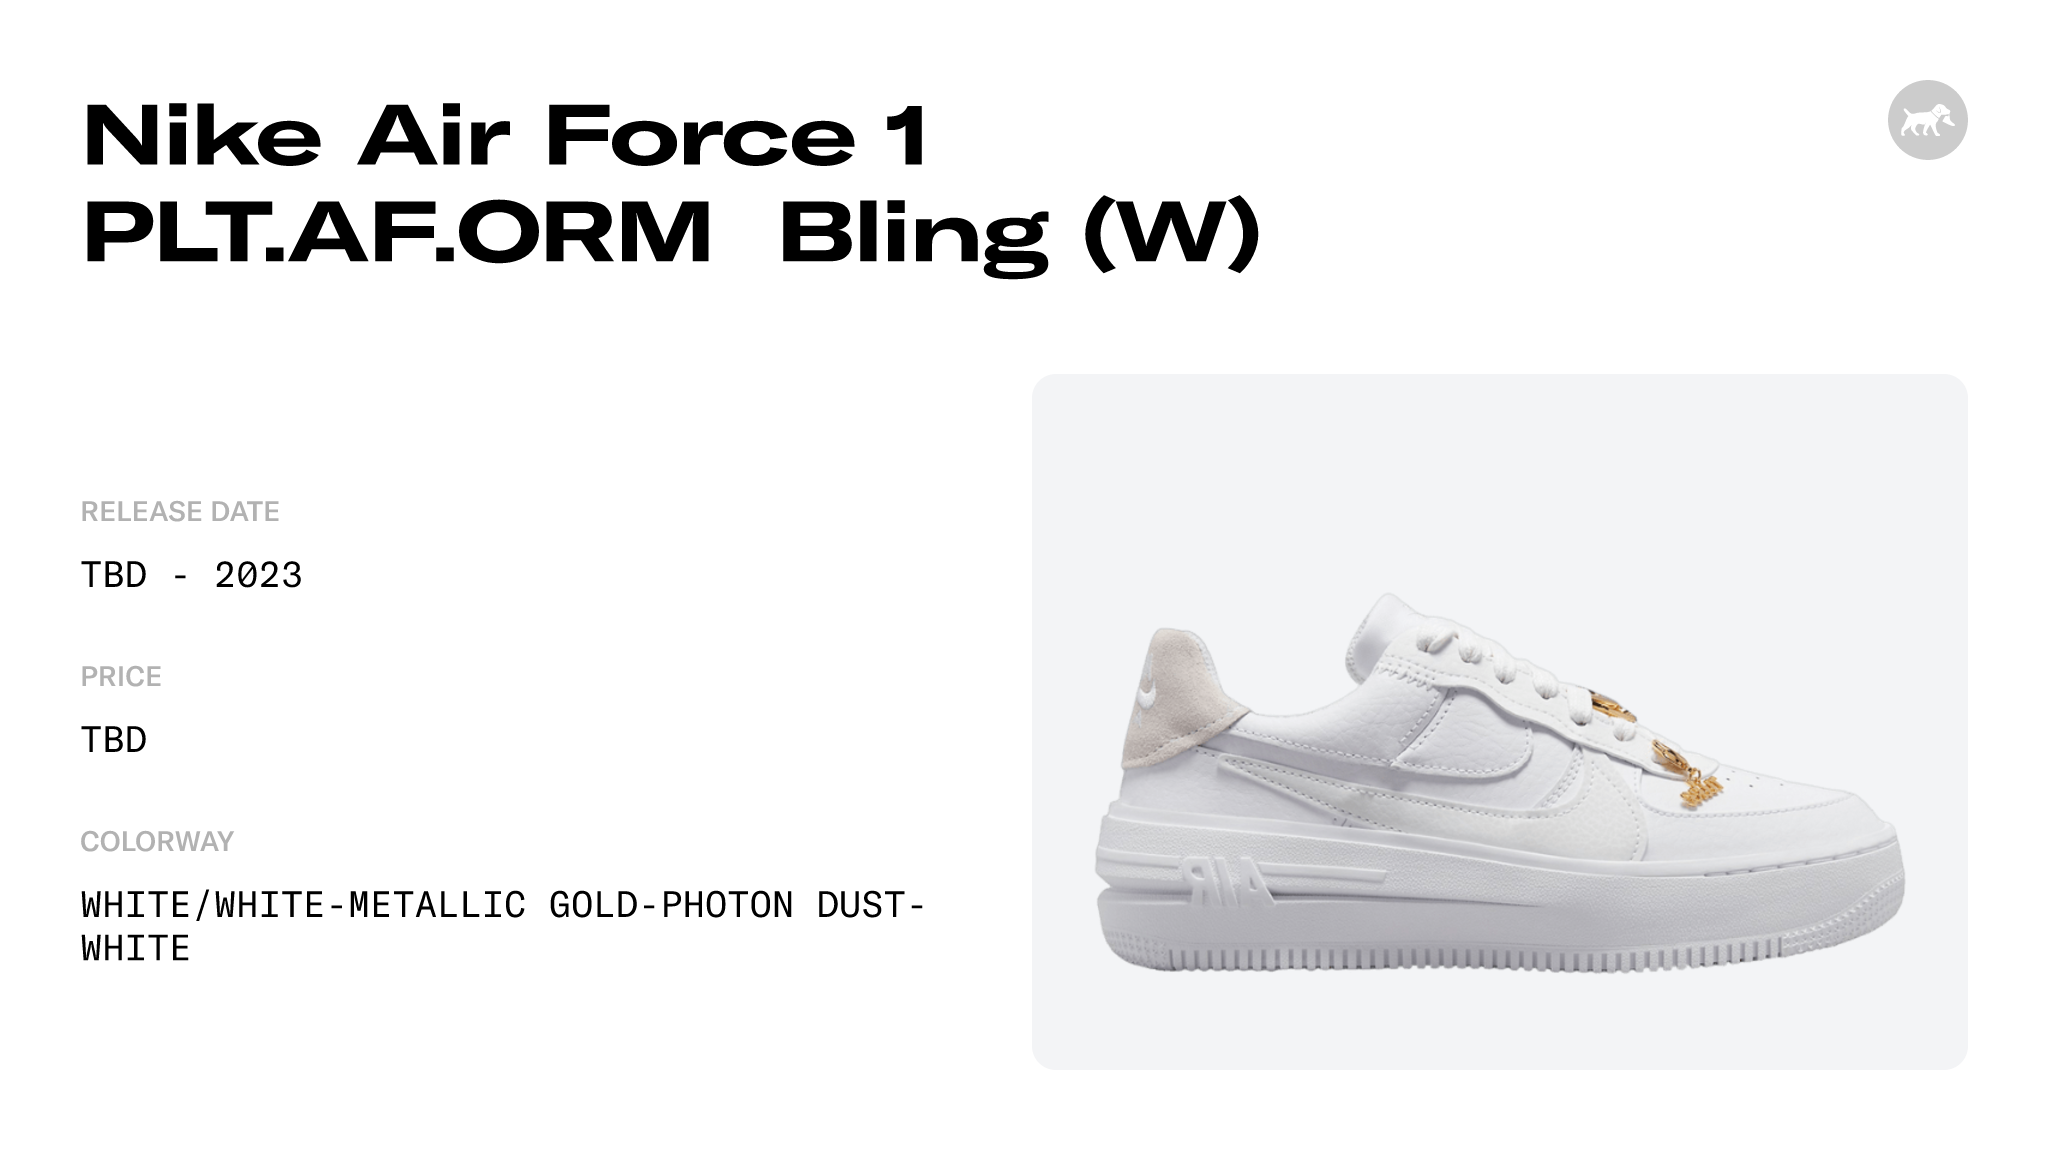 Nike Air Force 1 PLT.AF.ORM Bling (W) - FB8473-100 Raffles and Release Date